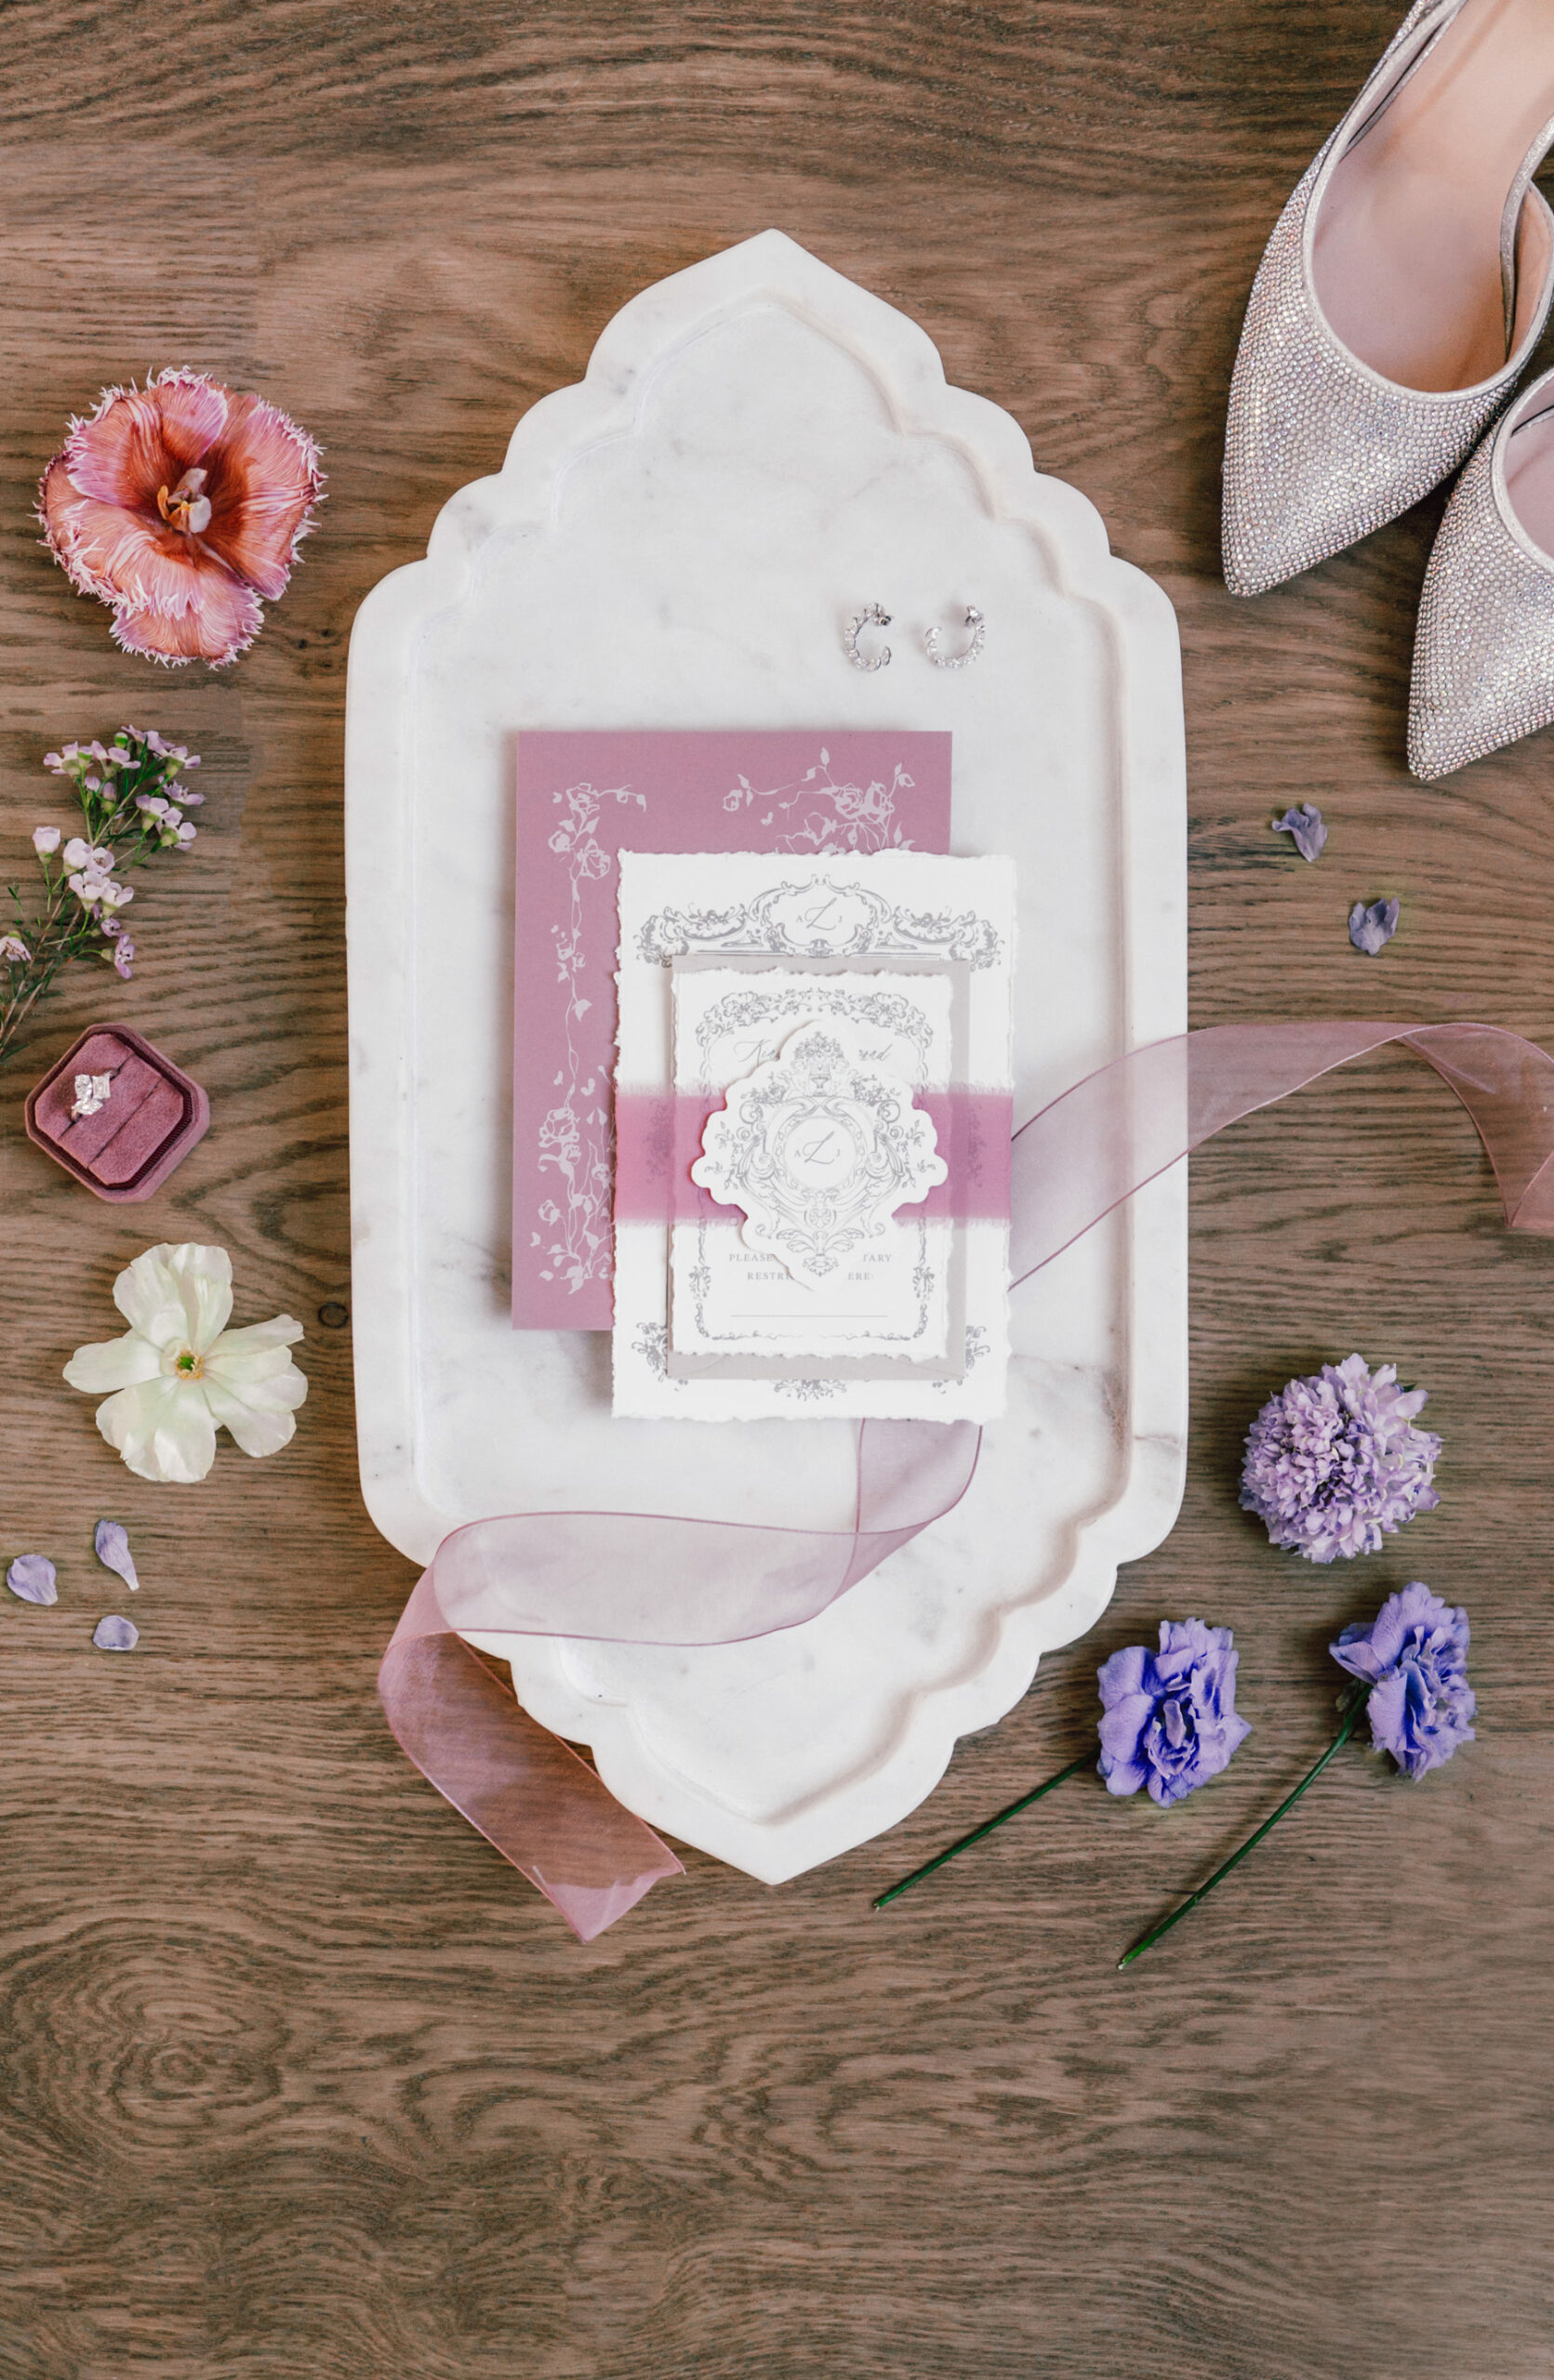 Pastel and floral wedding announcement for a fairytale wedding vibe by Kaushay&Co event planning. fairytale wedding announcement #Kaushay&Co #Kaushay&CoWeddings #StorybookWedding #Twenty+Creek #UtahWeddings #weddingplannerutah #Utahweddingplanner #romanticwedding #NorthernUtahEventPlanner